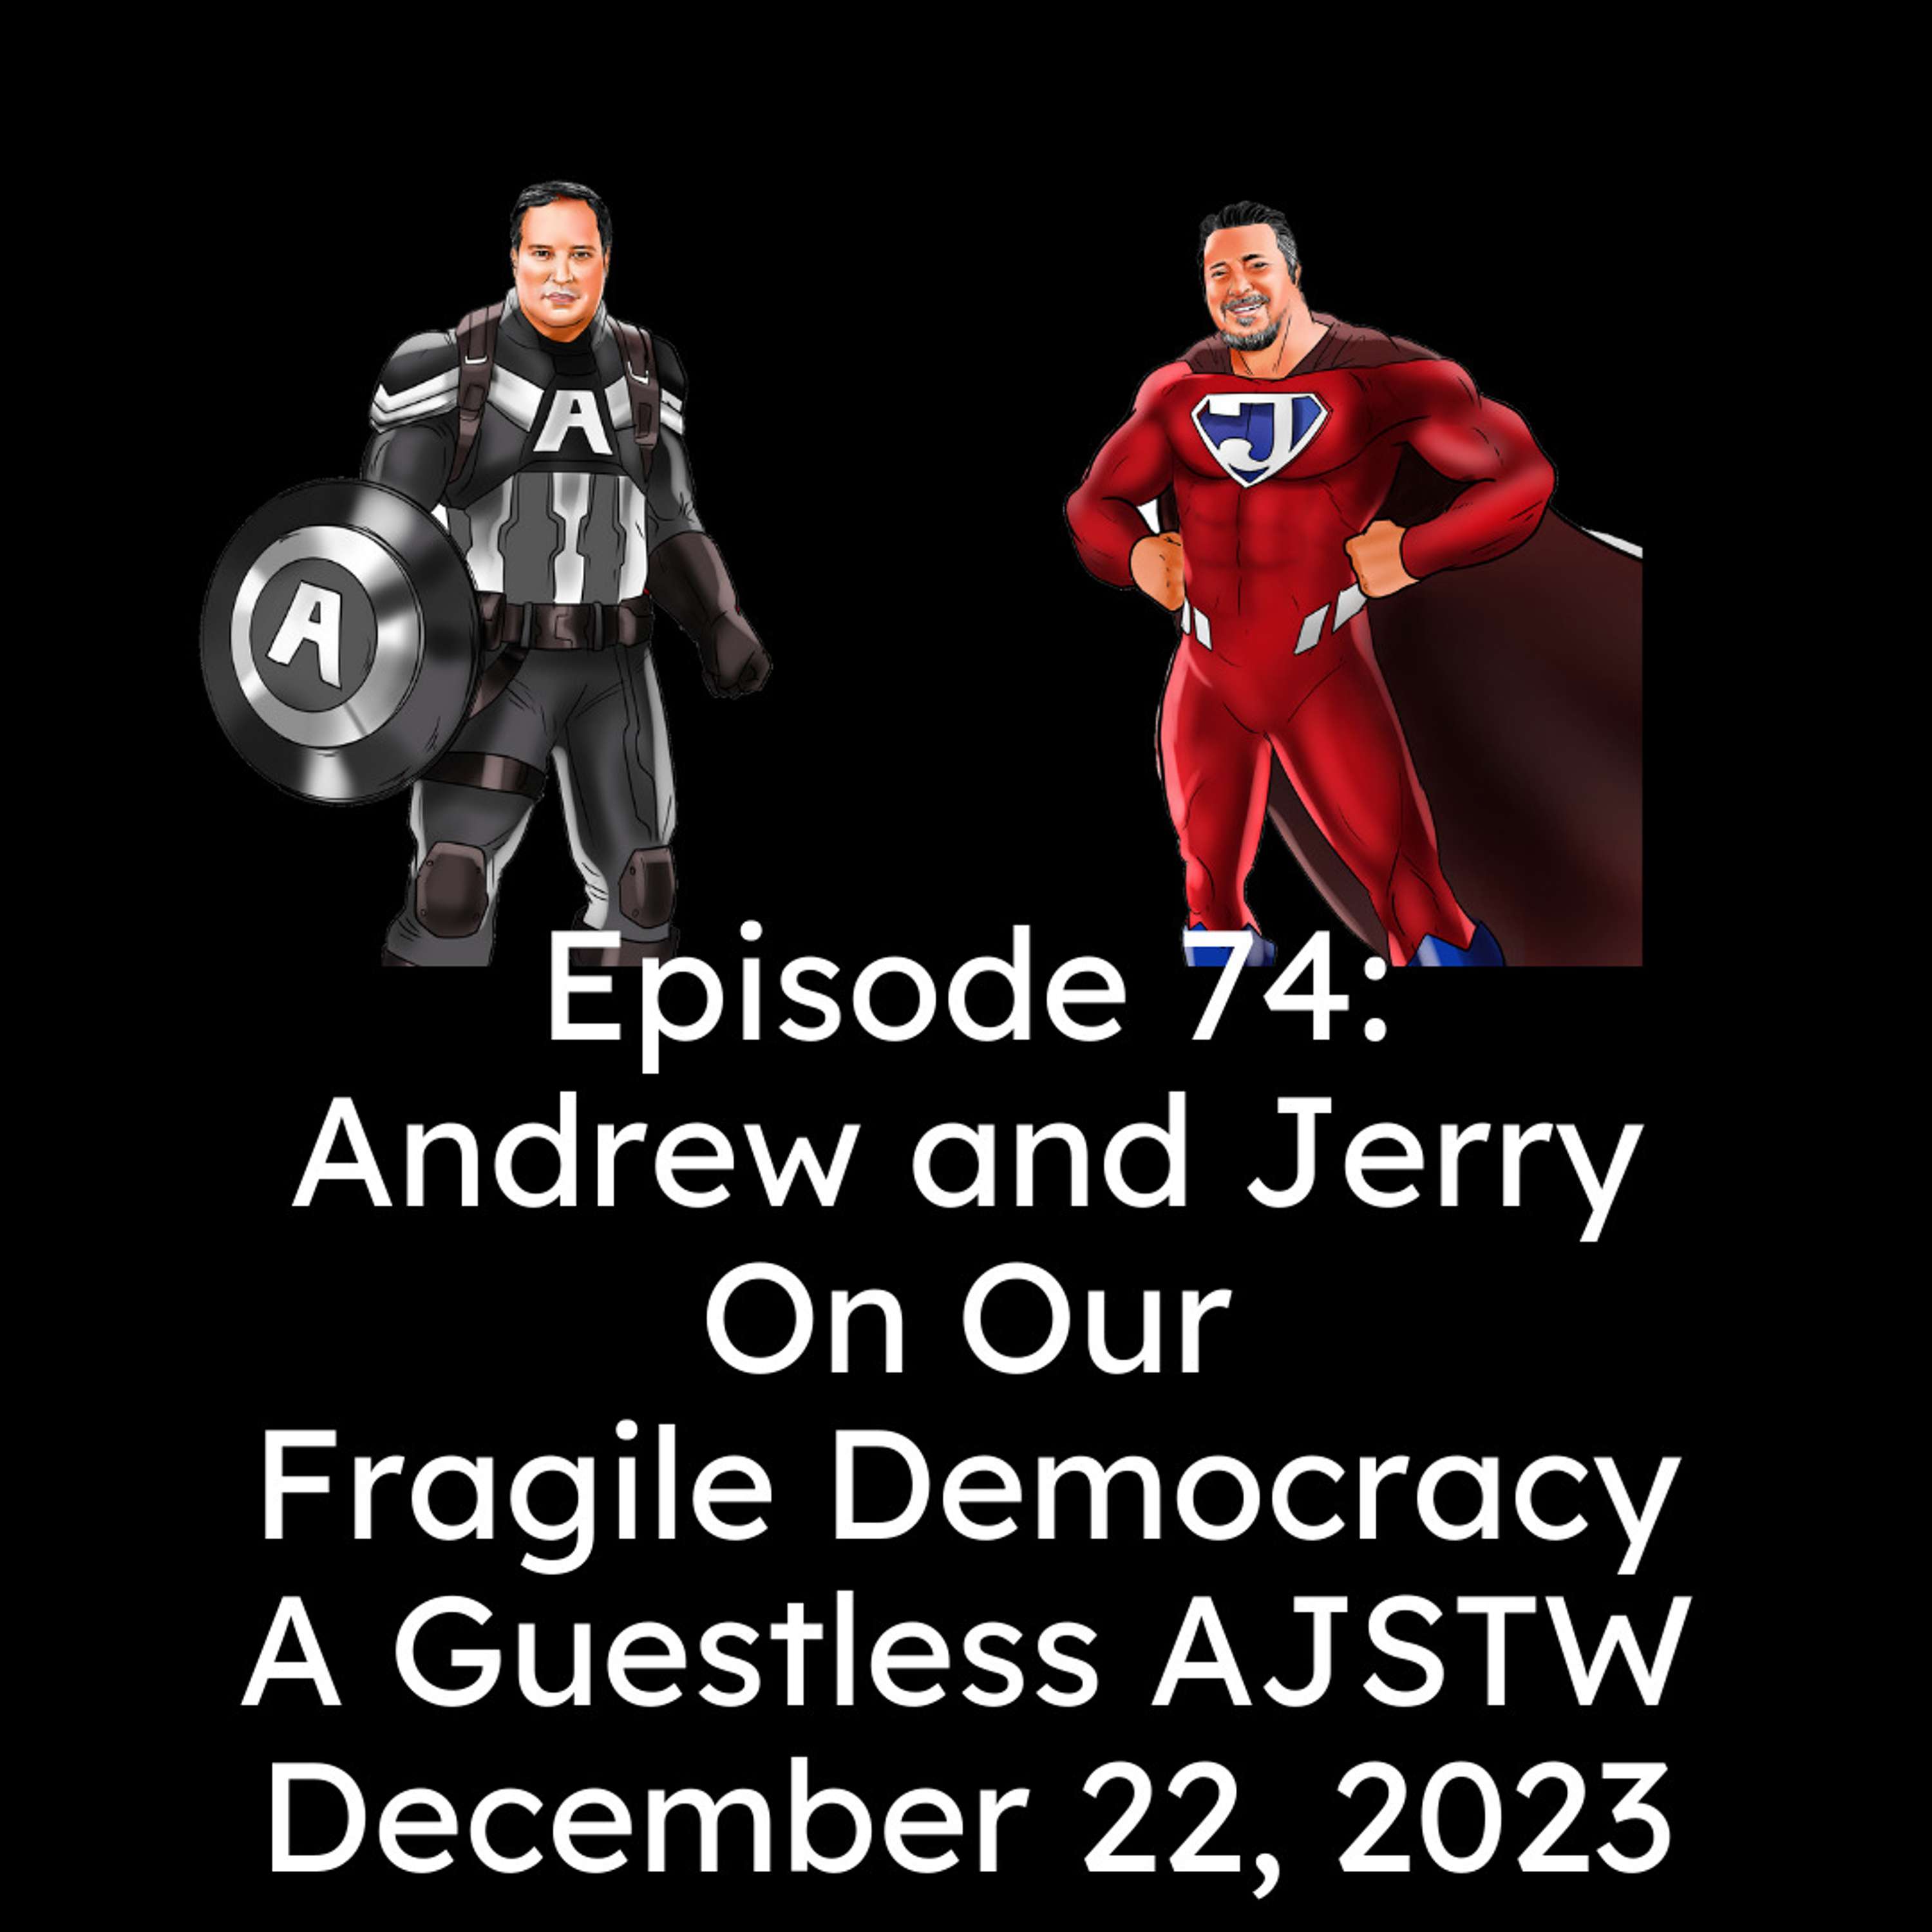 Andrew and Jerry On Our Fragile Democracy!